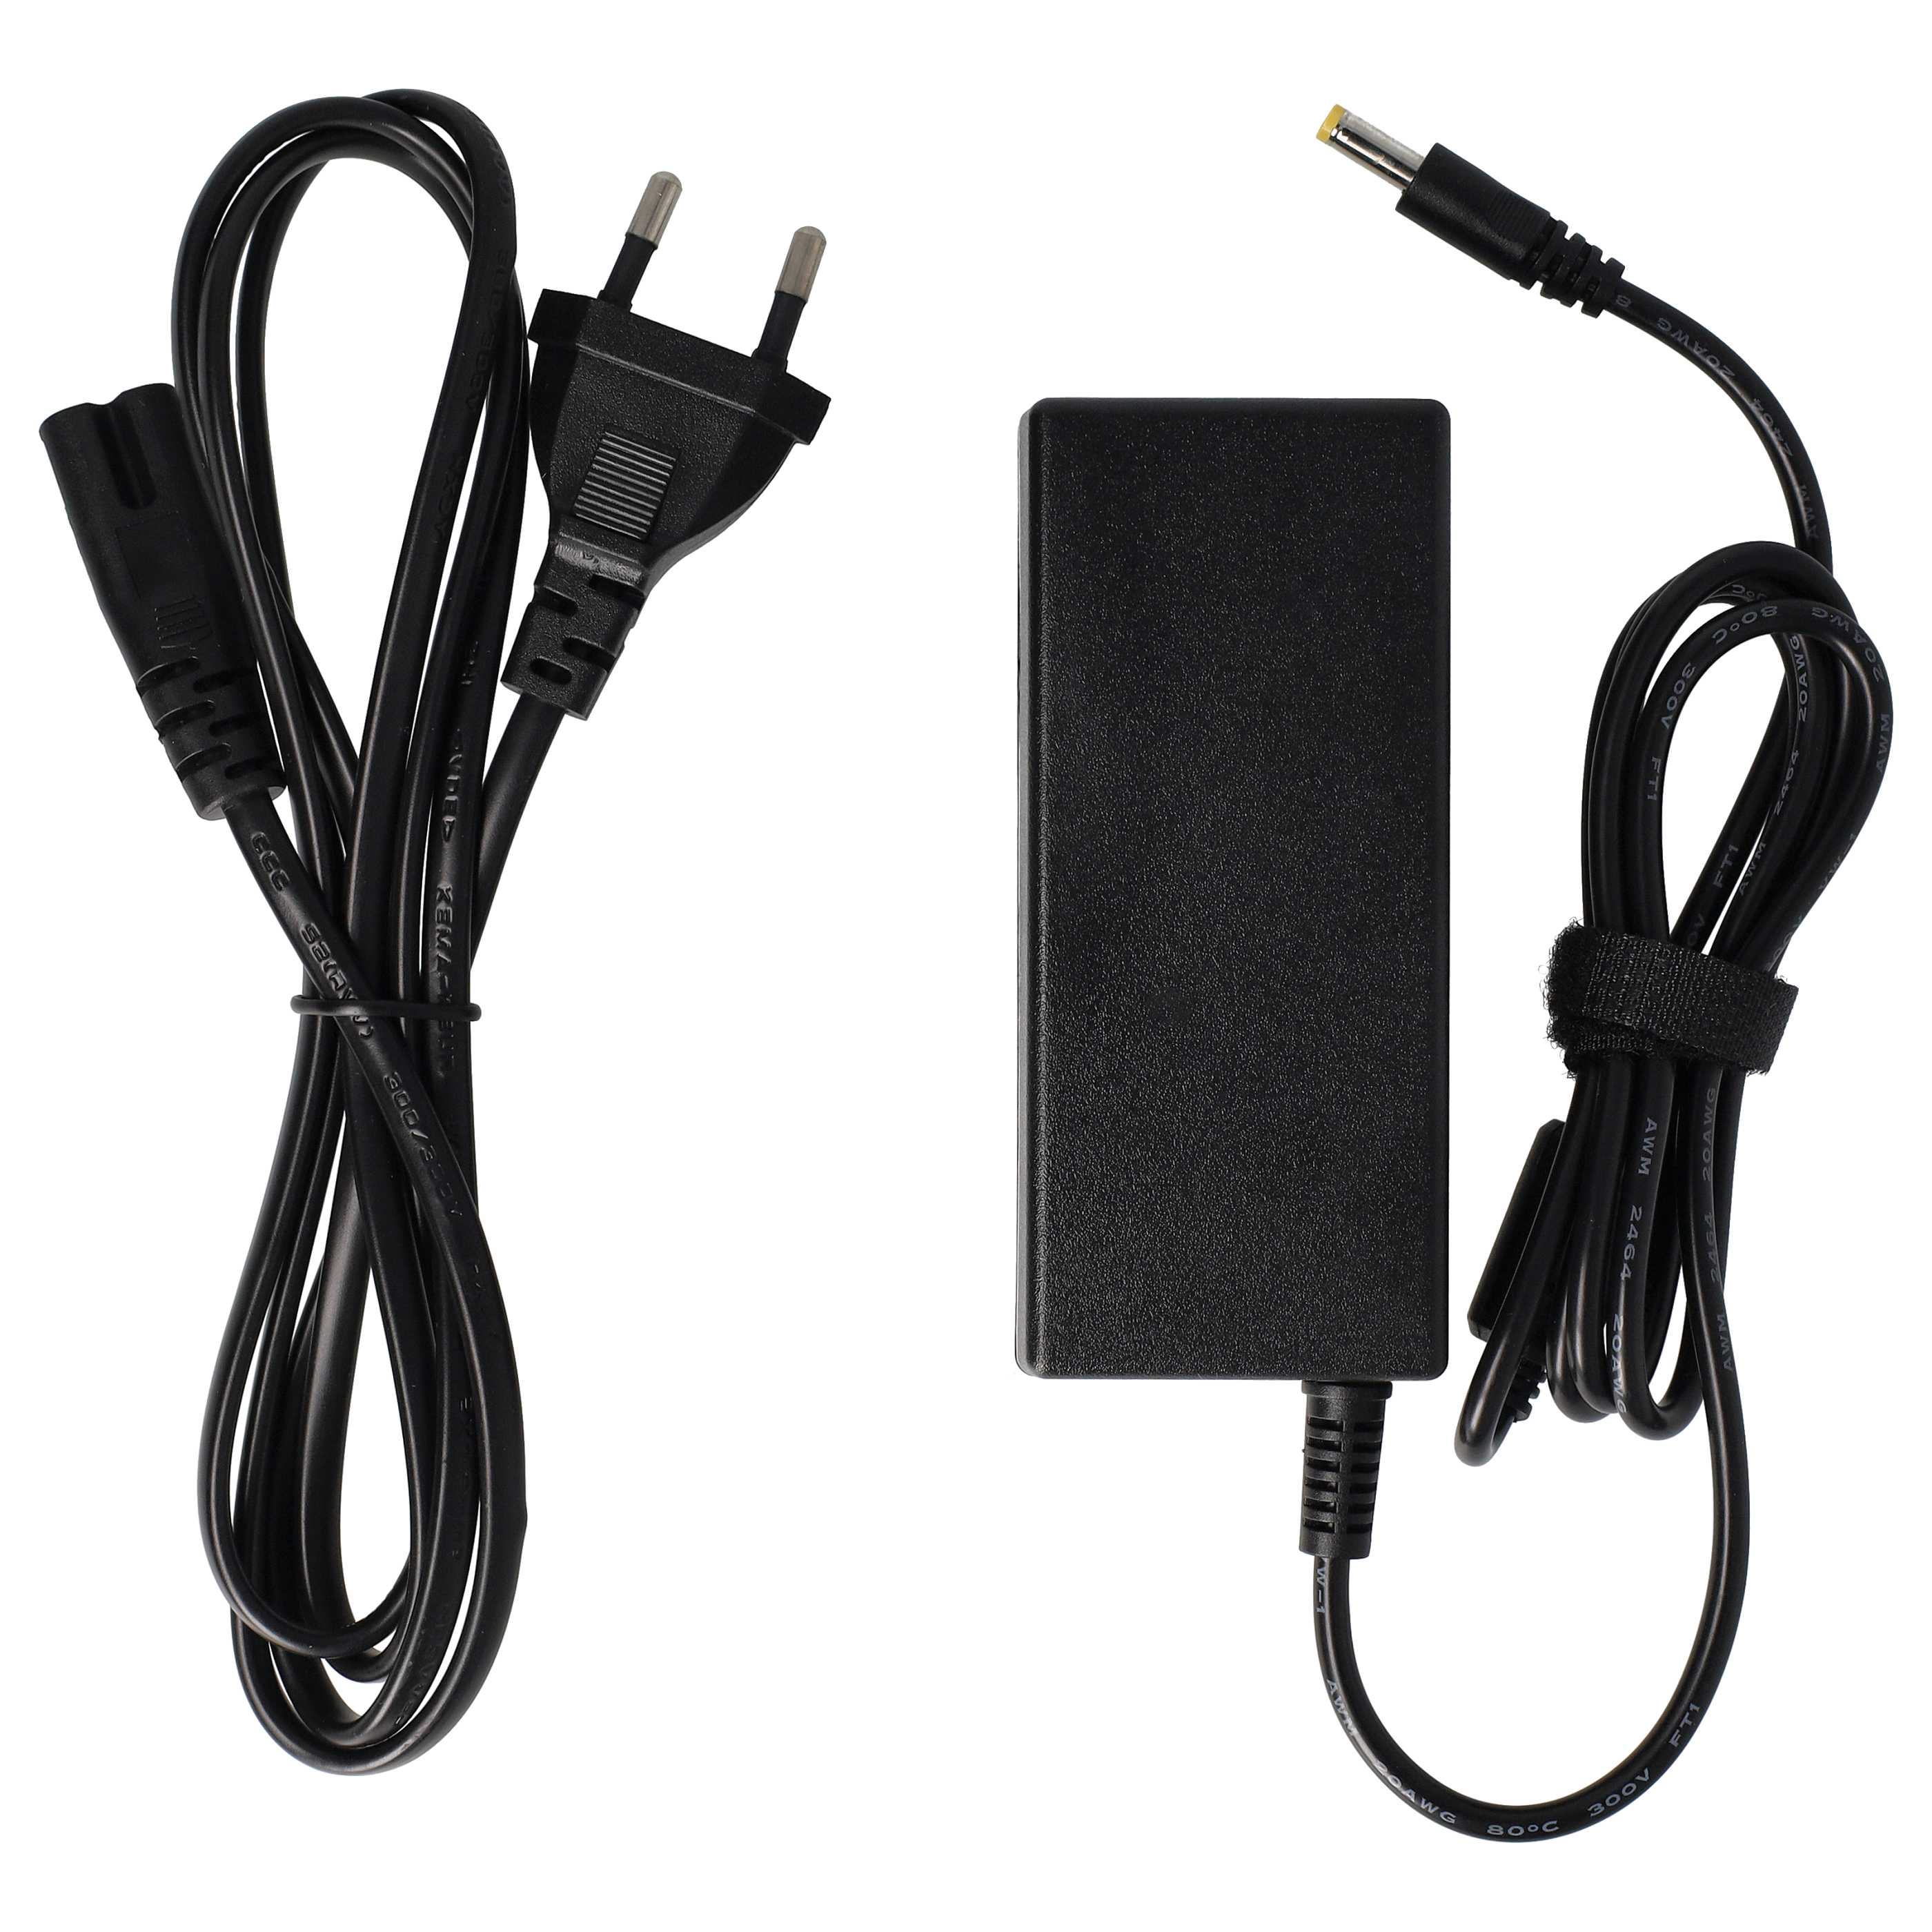 Mains Power Adapter replaces HP 101898-001, 101880-001, 120765-001, 159224-001, 146594-001 forNotebook, 65 W